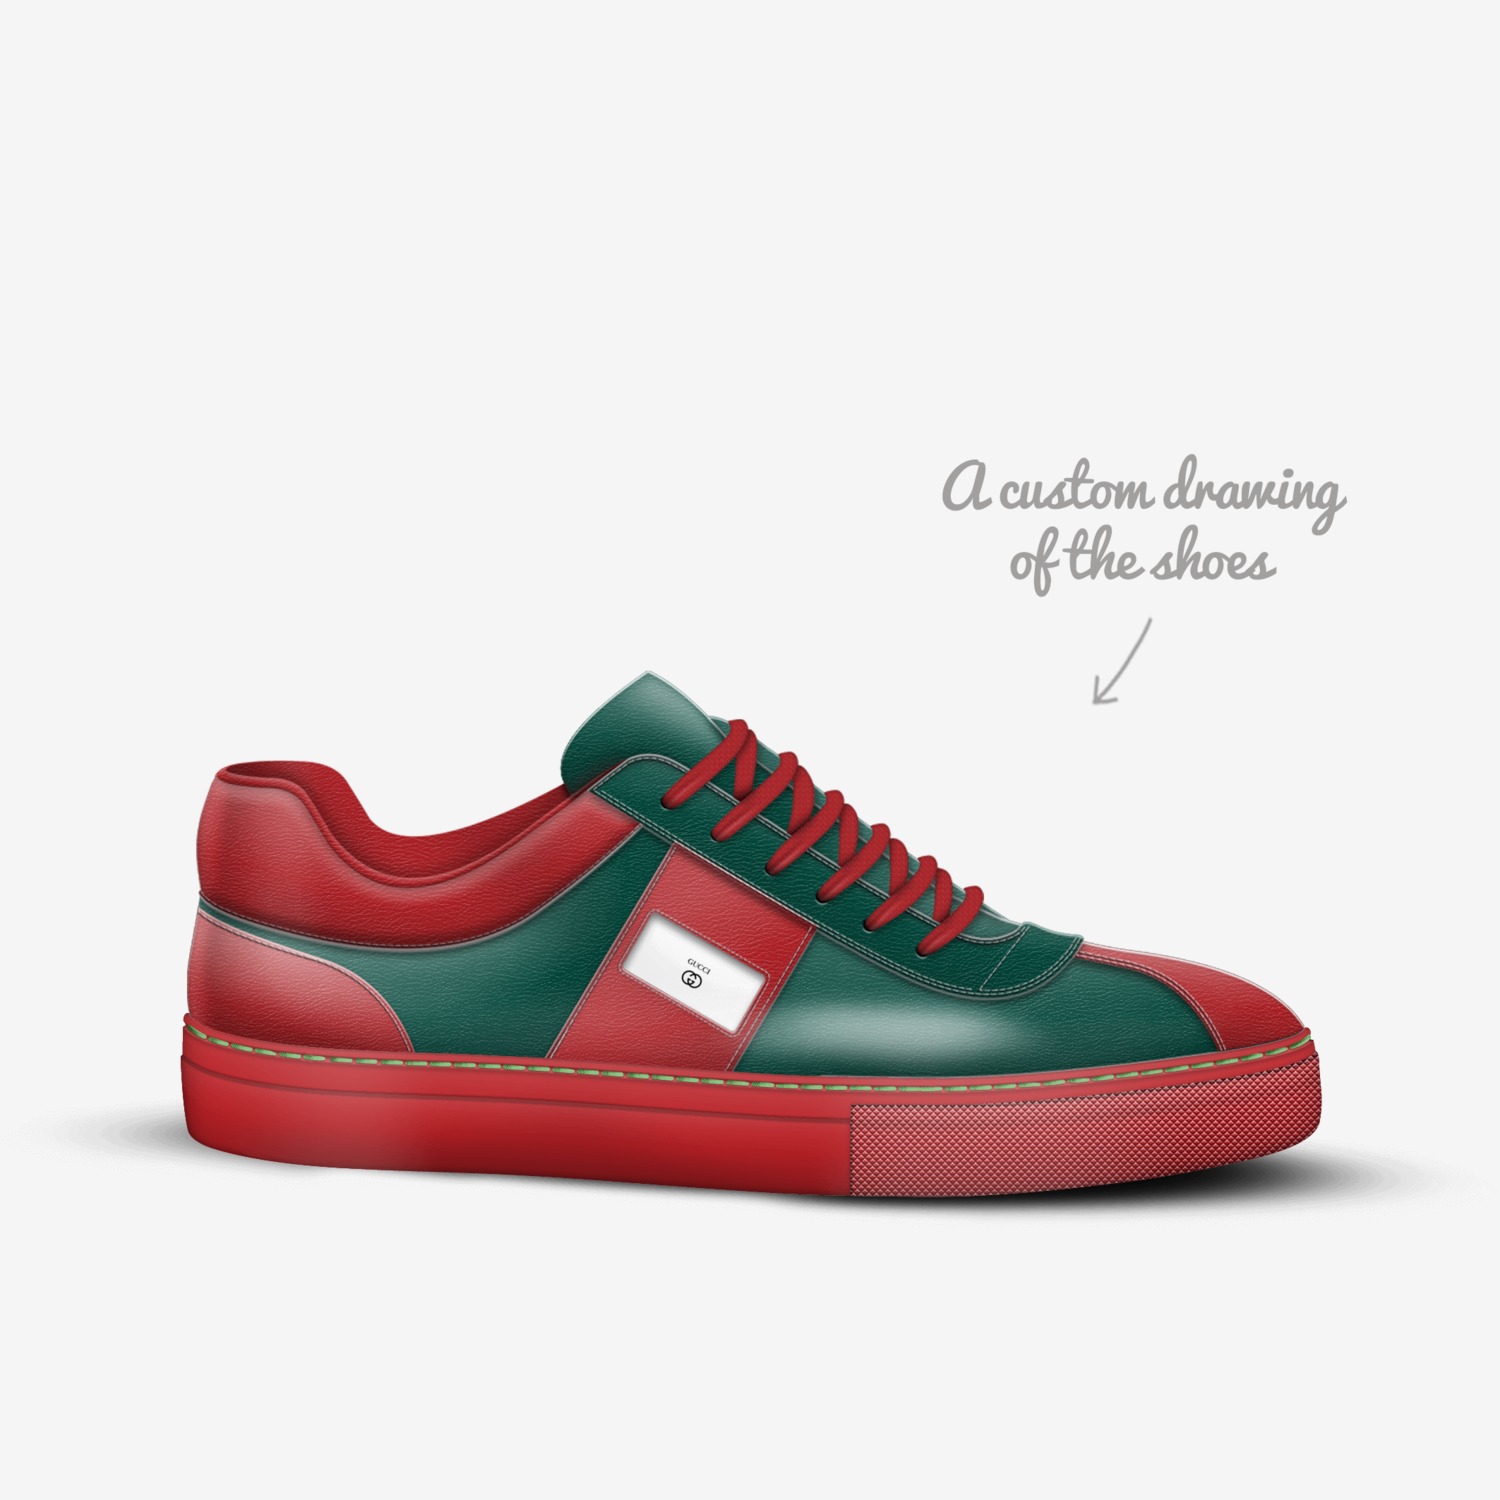 expensive sneakers | Custom Shoe concept by Orestis